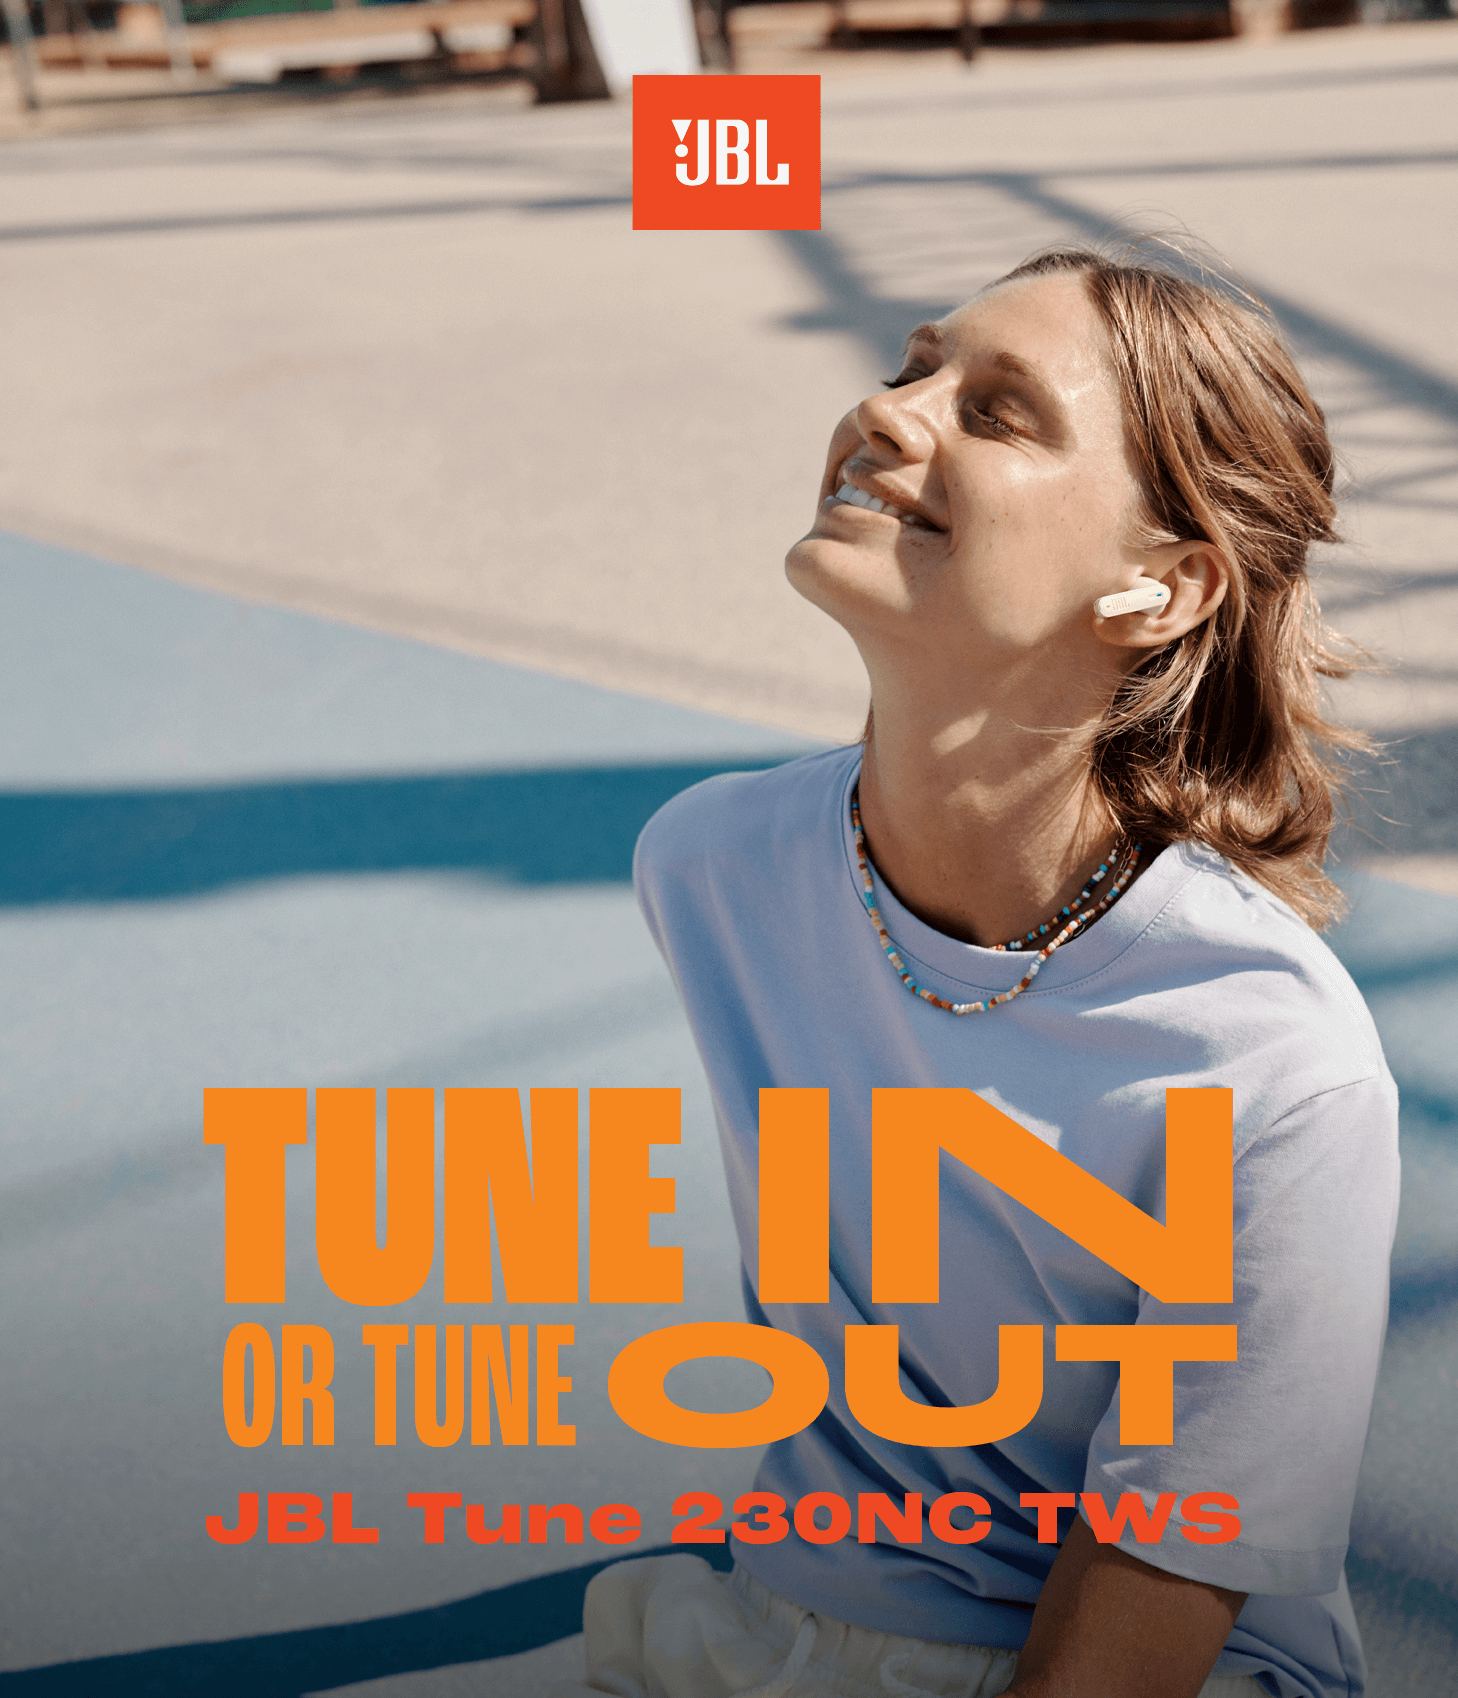 JBL. Tune in or tune out. JBL tune 230nc tws.